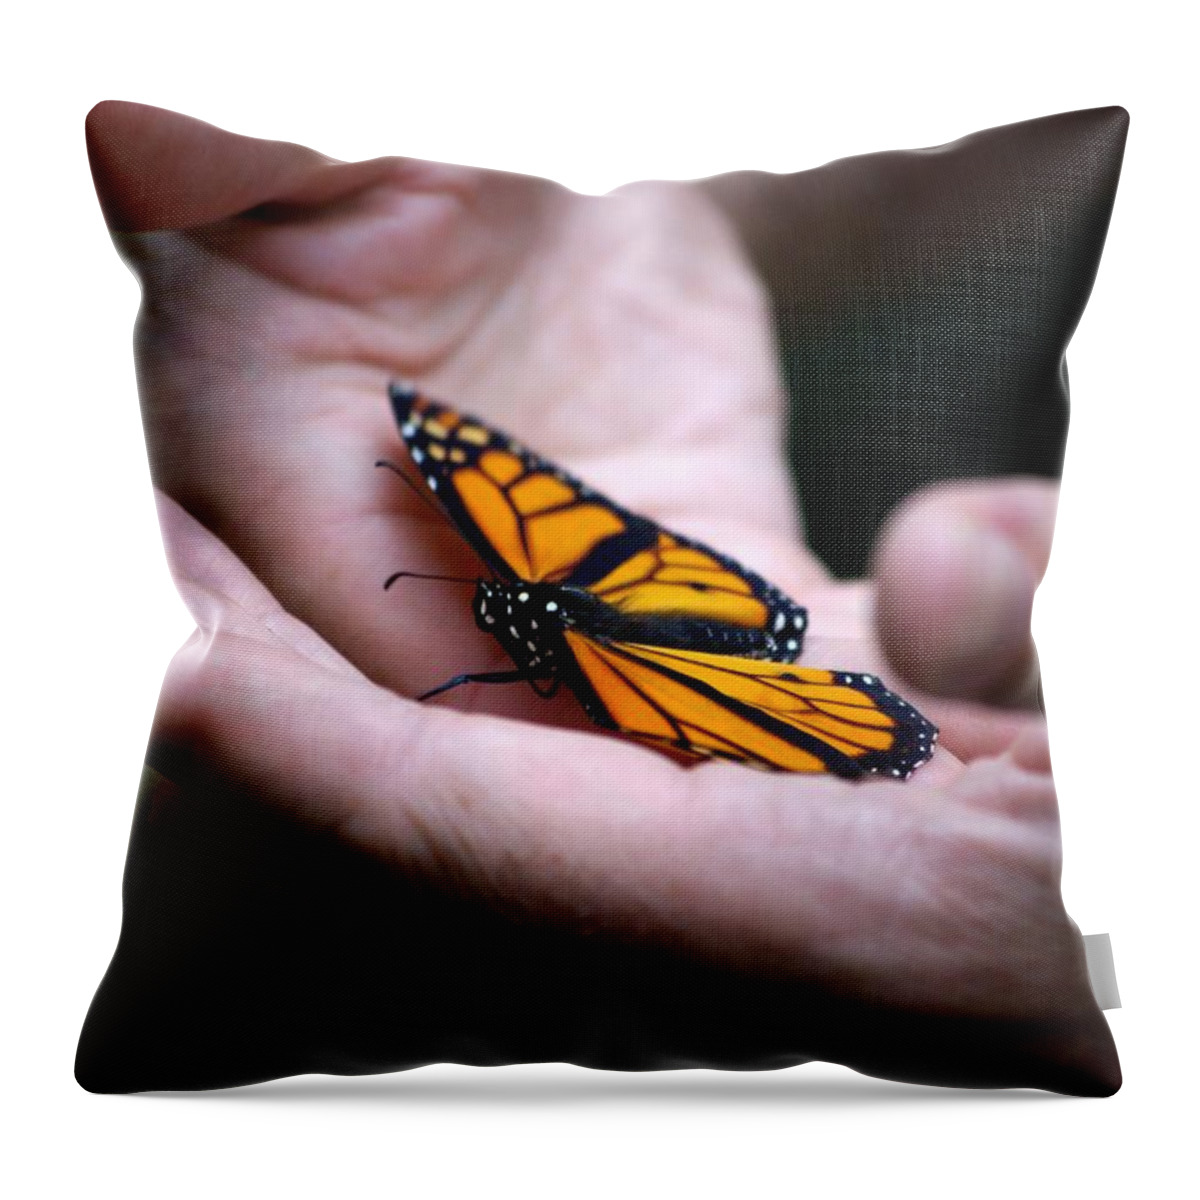 Butterfly Throw Pillow featuring the photograph Gentle Friend by Linda Mishler